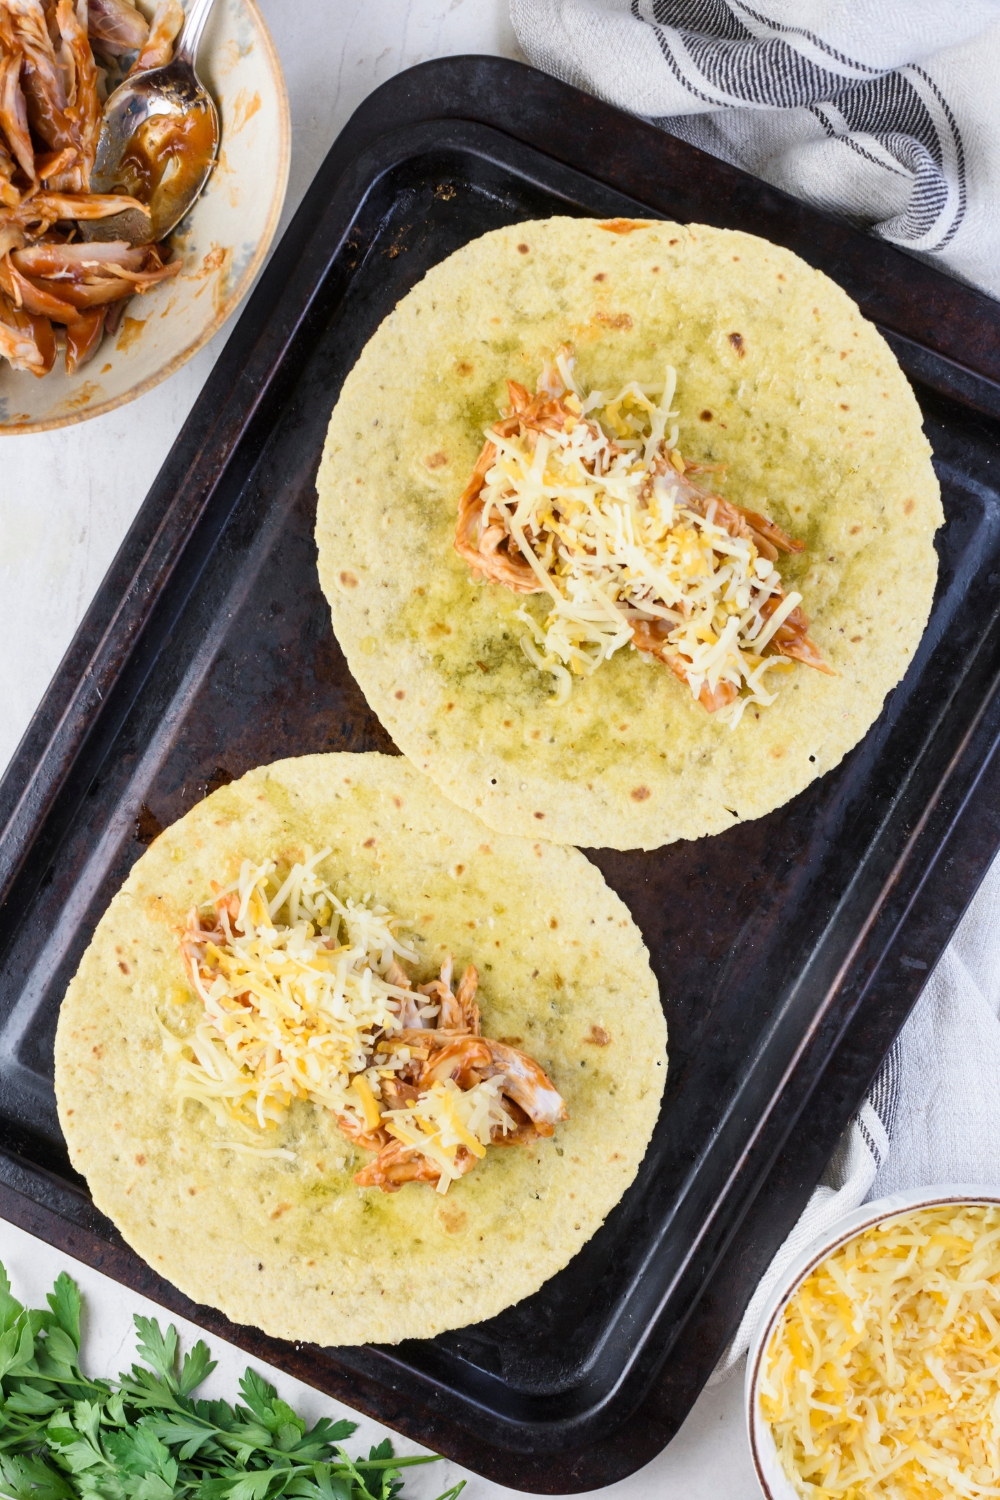 Two corn tortillas filled with shredded chicken in barbecue sauce and topped with shredded cheese.